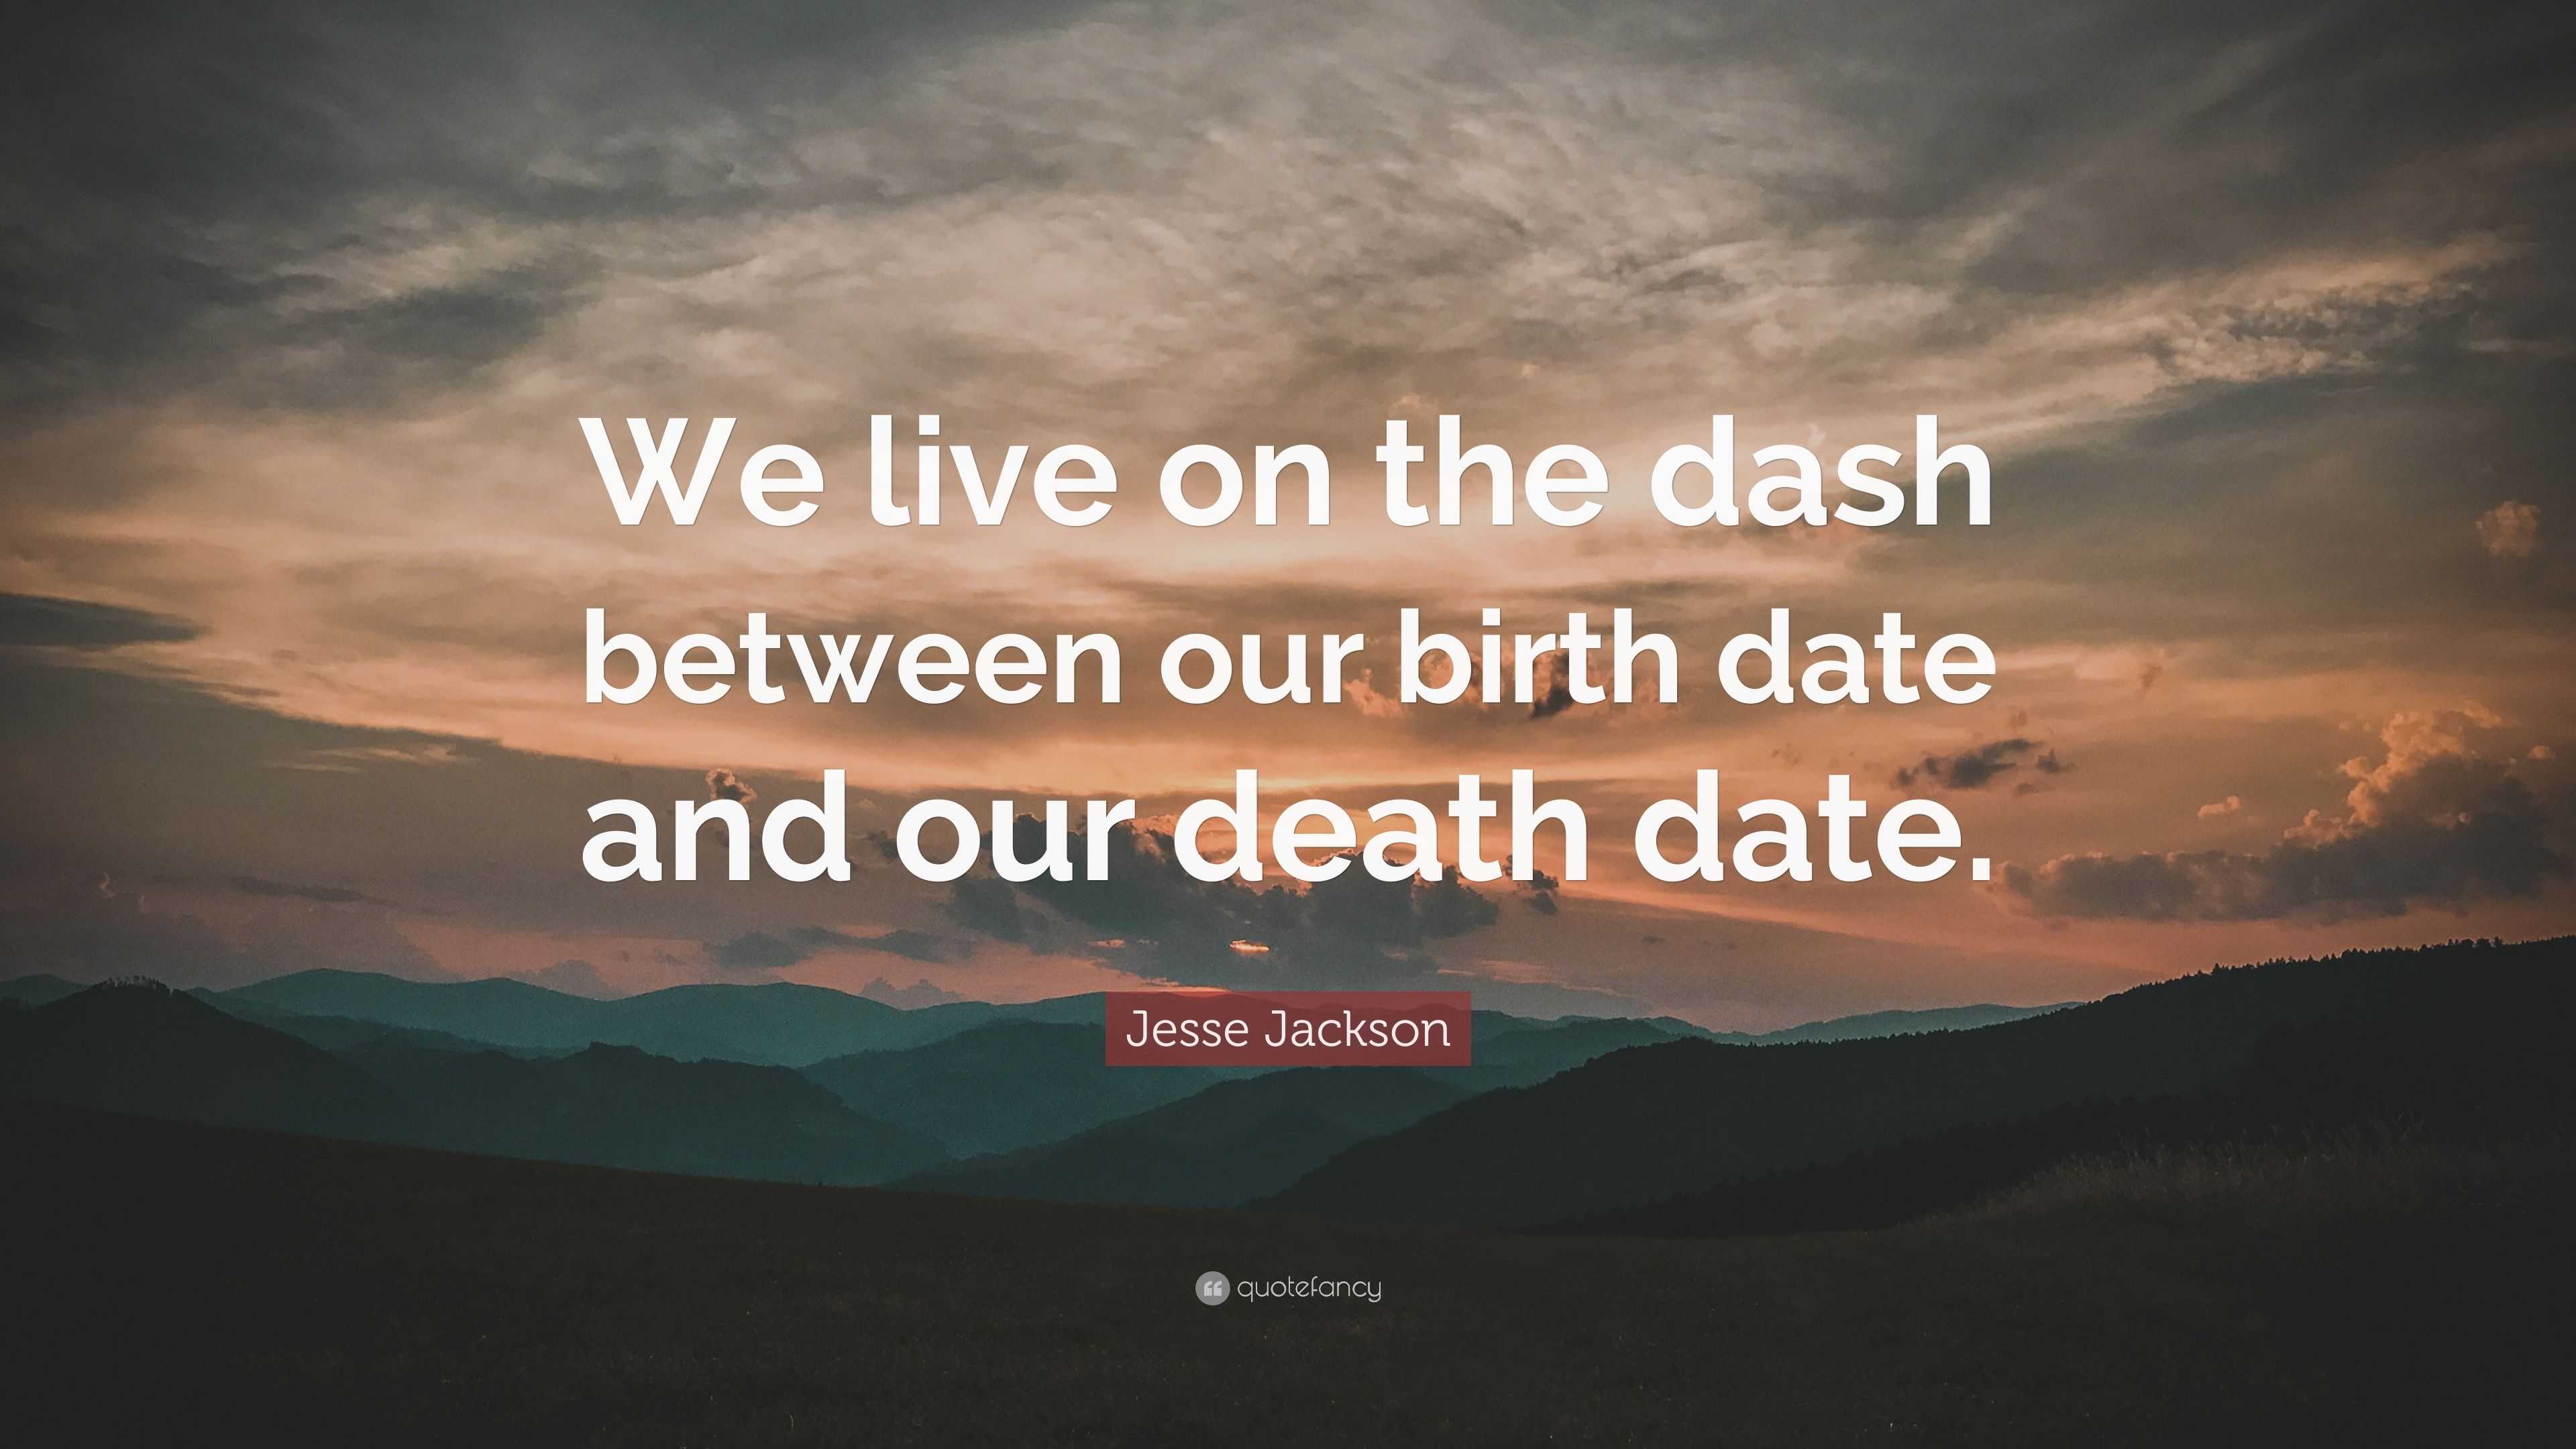 https://quotefancy.com/media/wallpaper/3840x2160/5044265-Jesse-Jackson-Quote-We-live-on-the-dash-between-our-birth-date-and.jpg